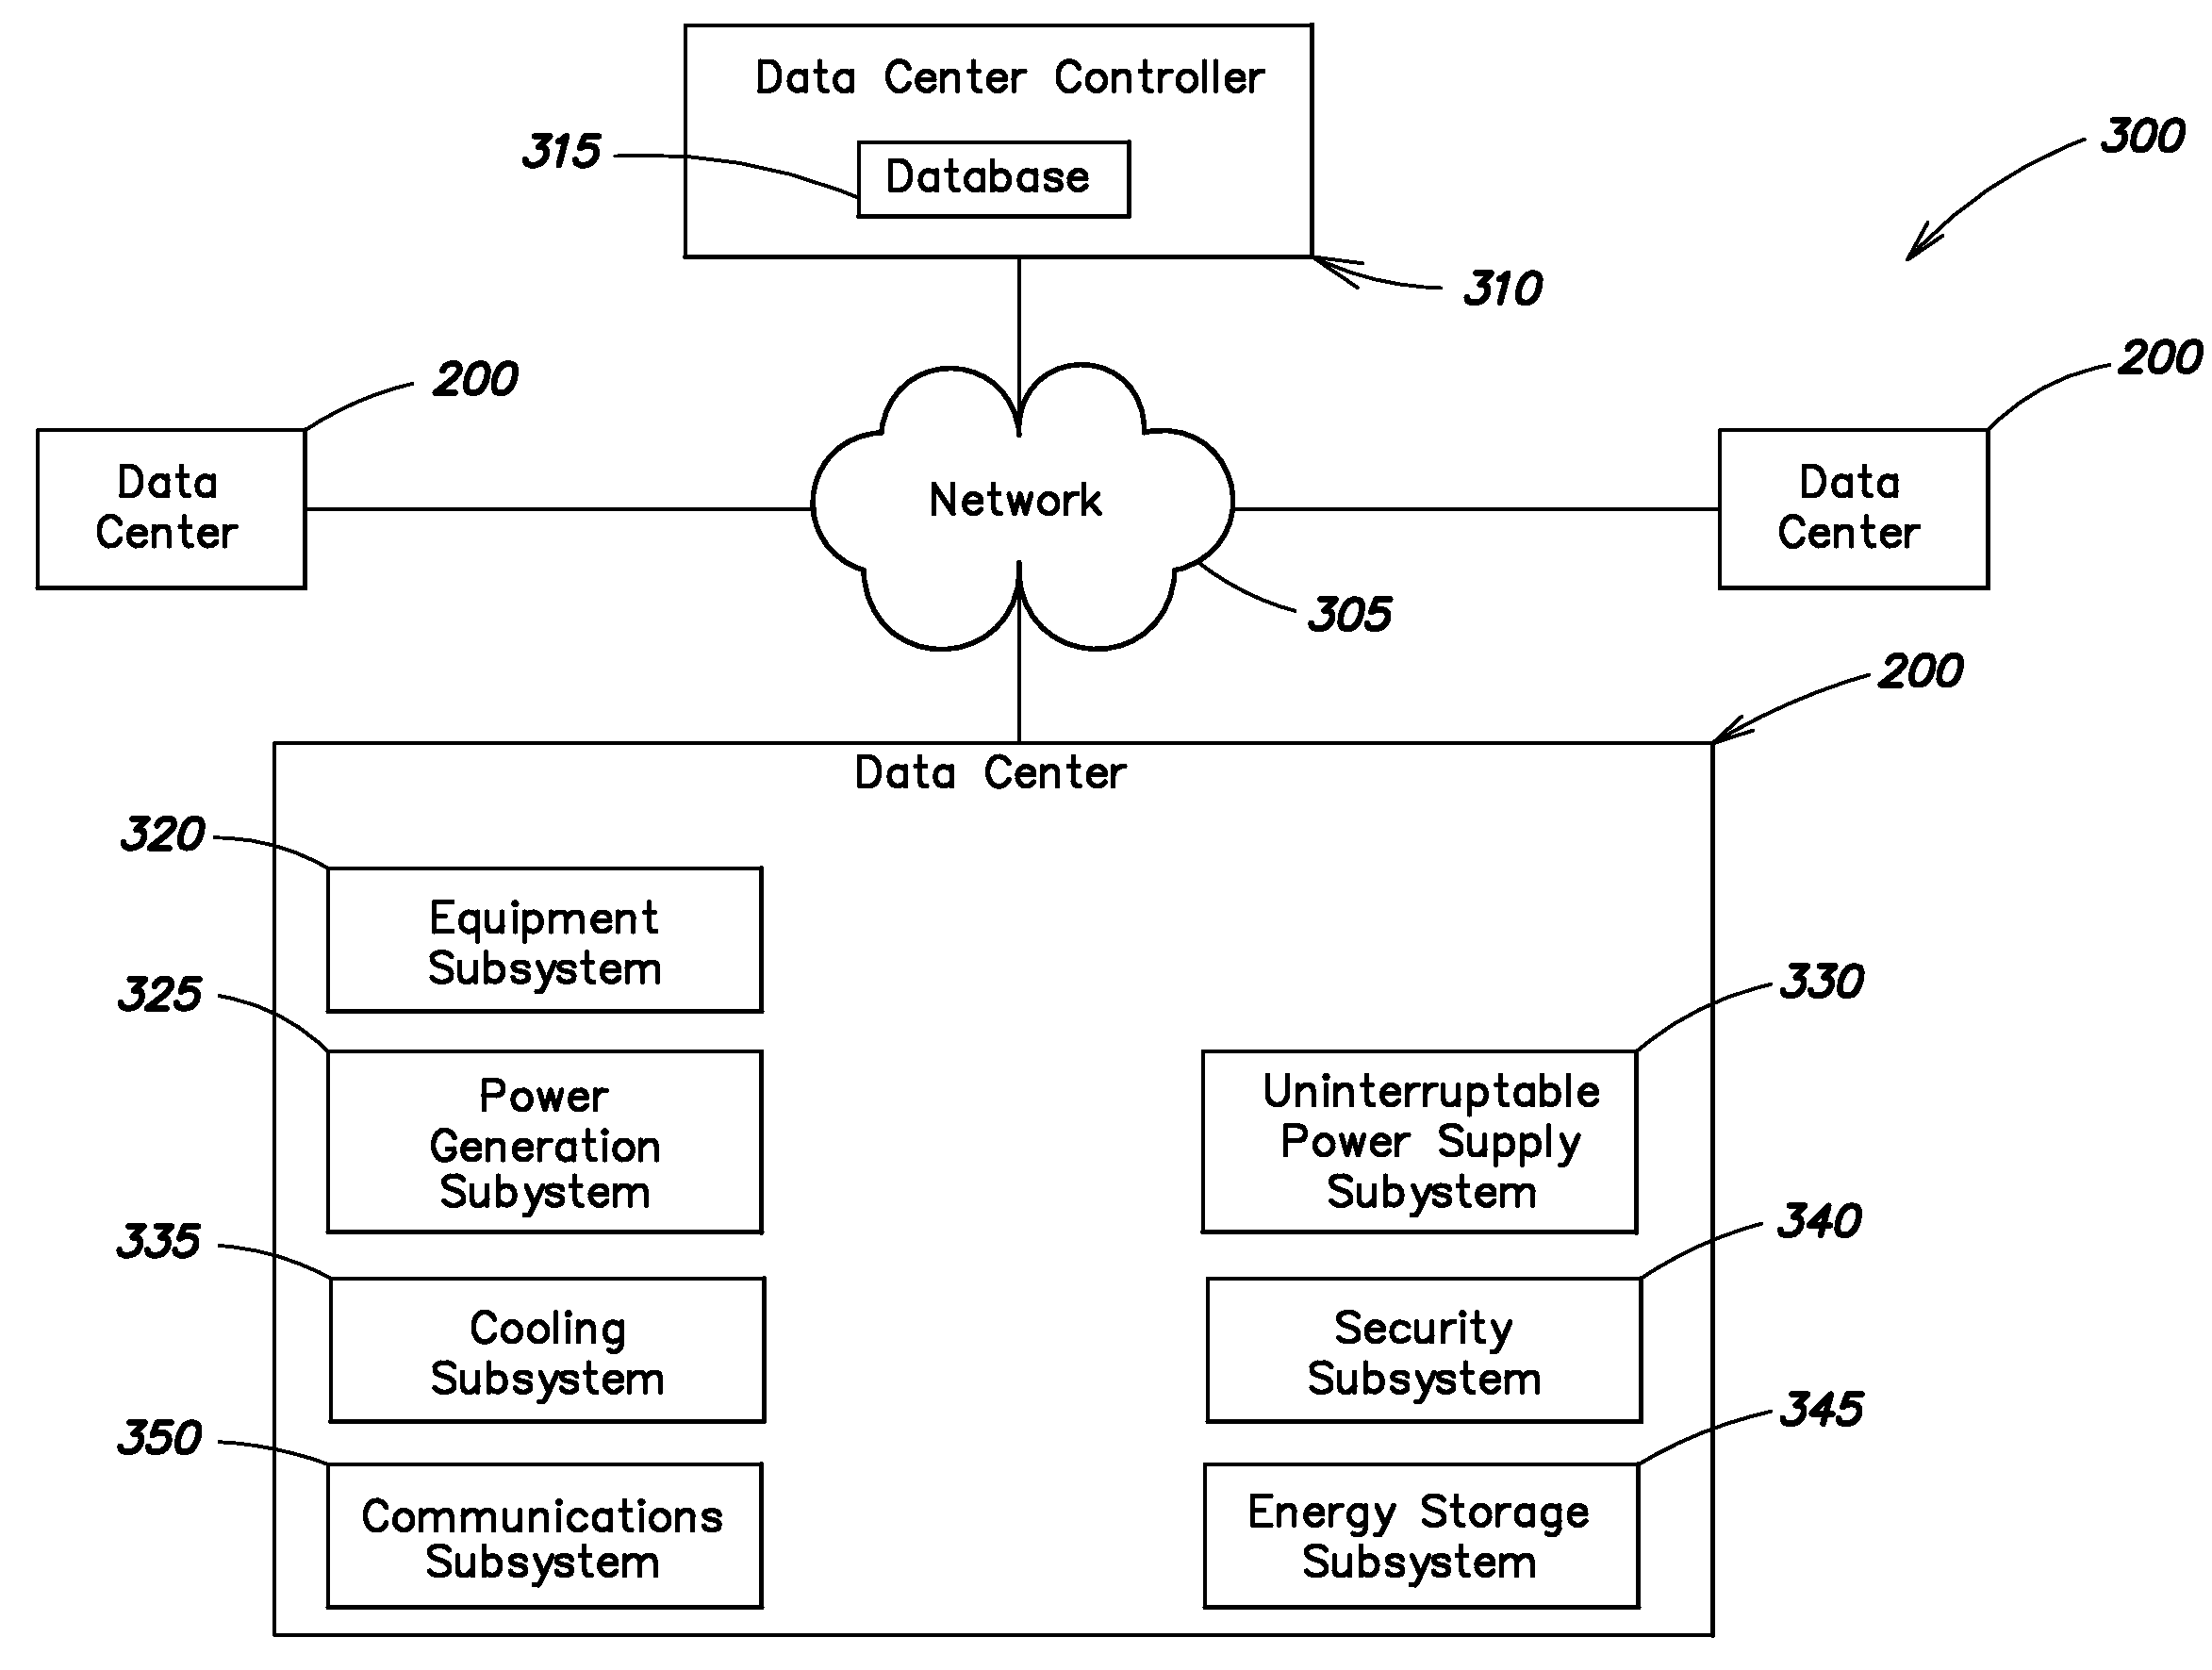 Power supply and data center control